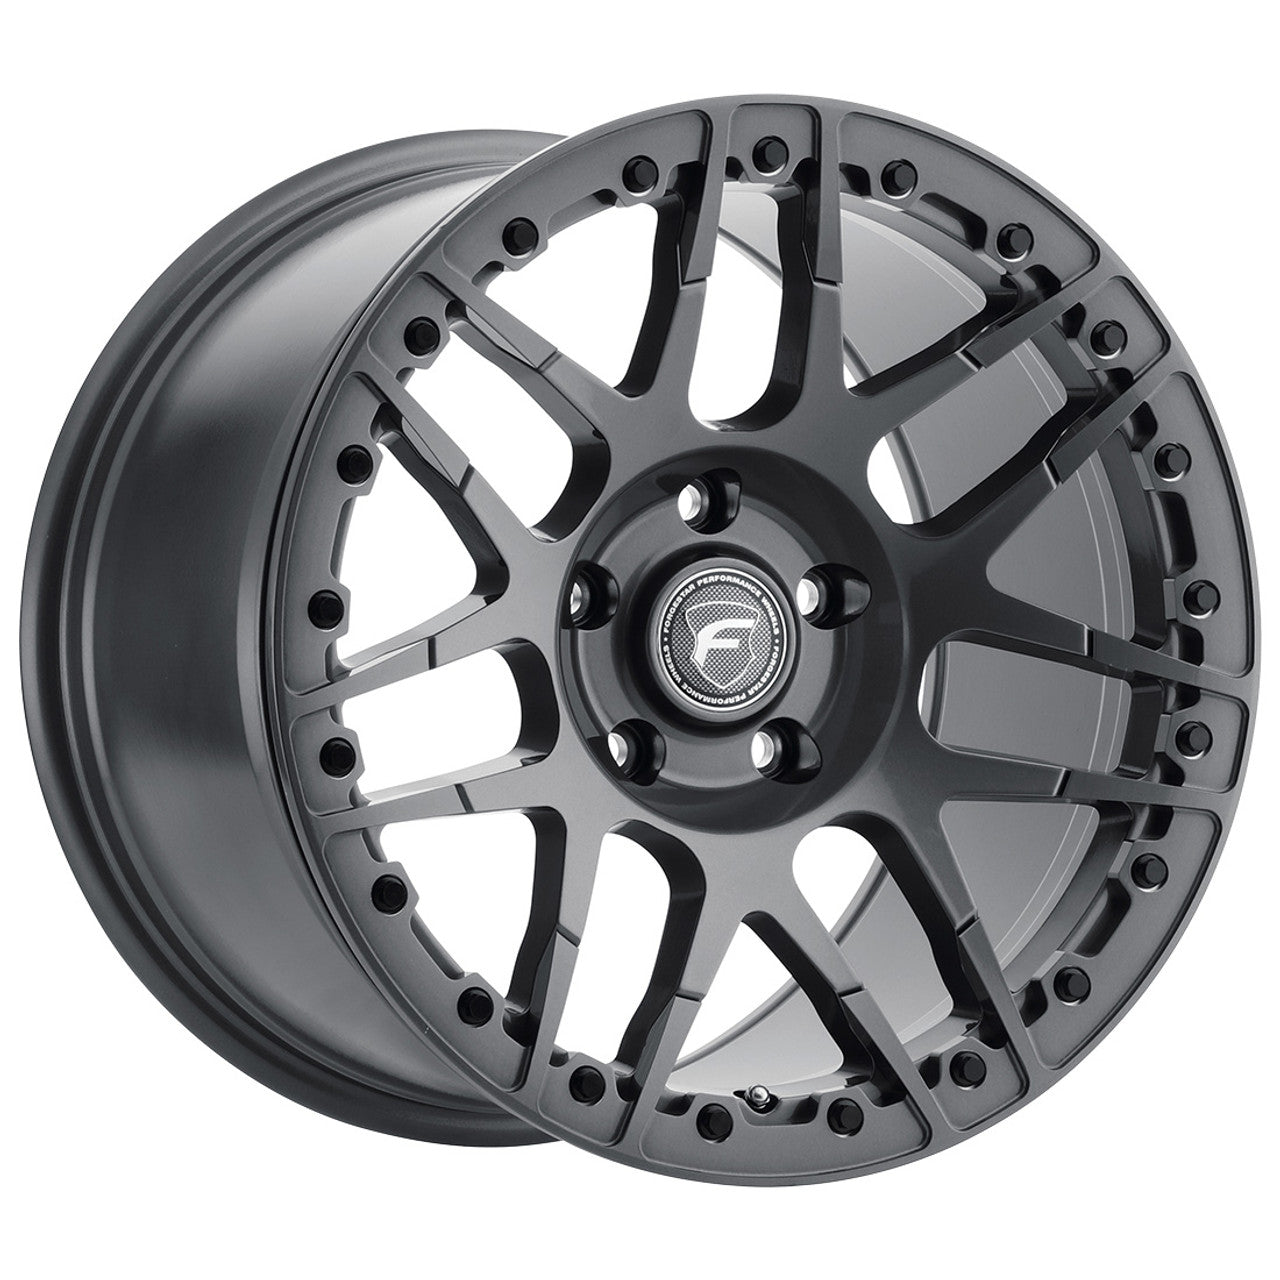 Forgestar Drag Pack Series F14 Beadlock 17x10 6.7" Backspace Gloss Anthracite Rear Wheel for 05-Current Challenger, Charger, Magnum & 300C SRT8, SRT & Hellcat - F28370071P30